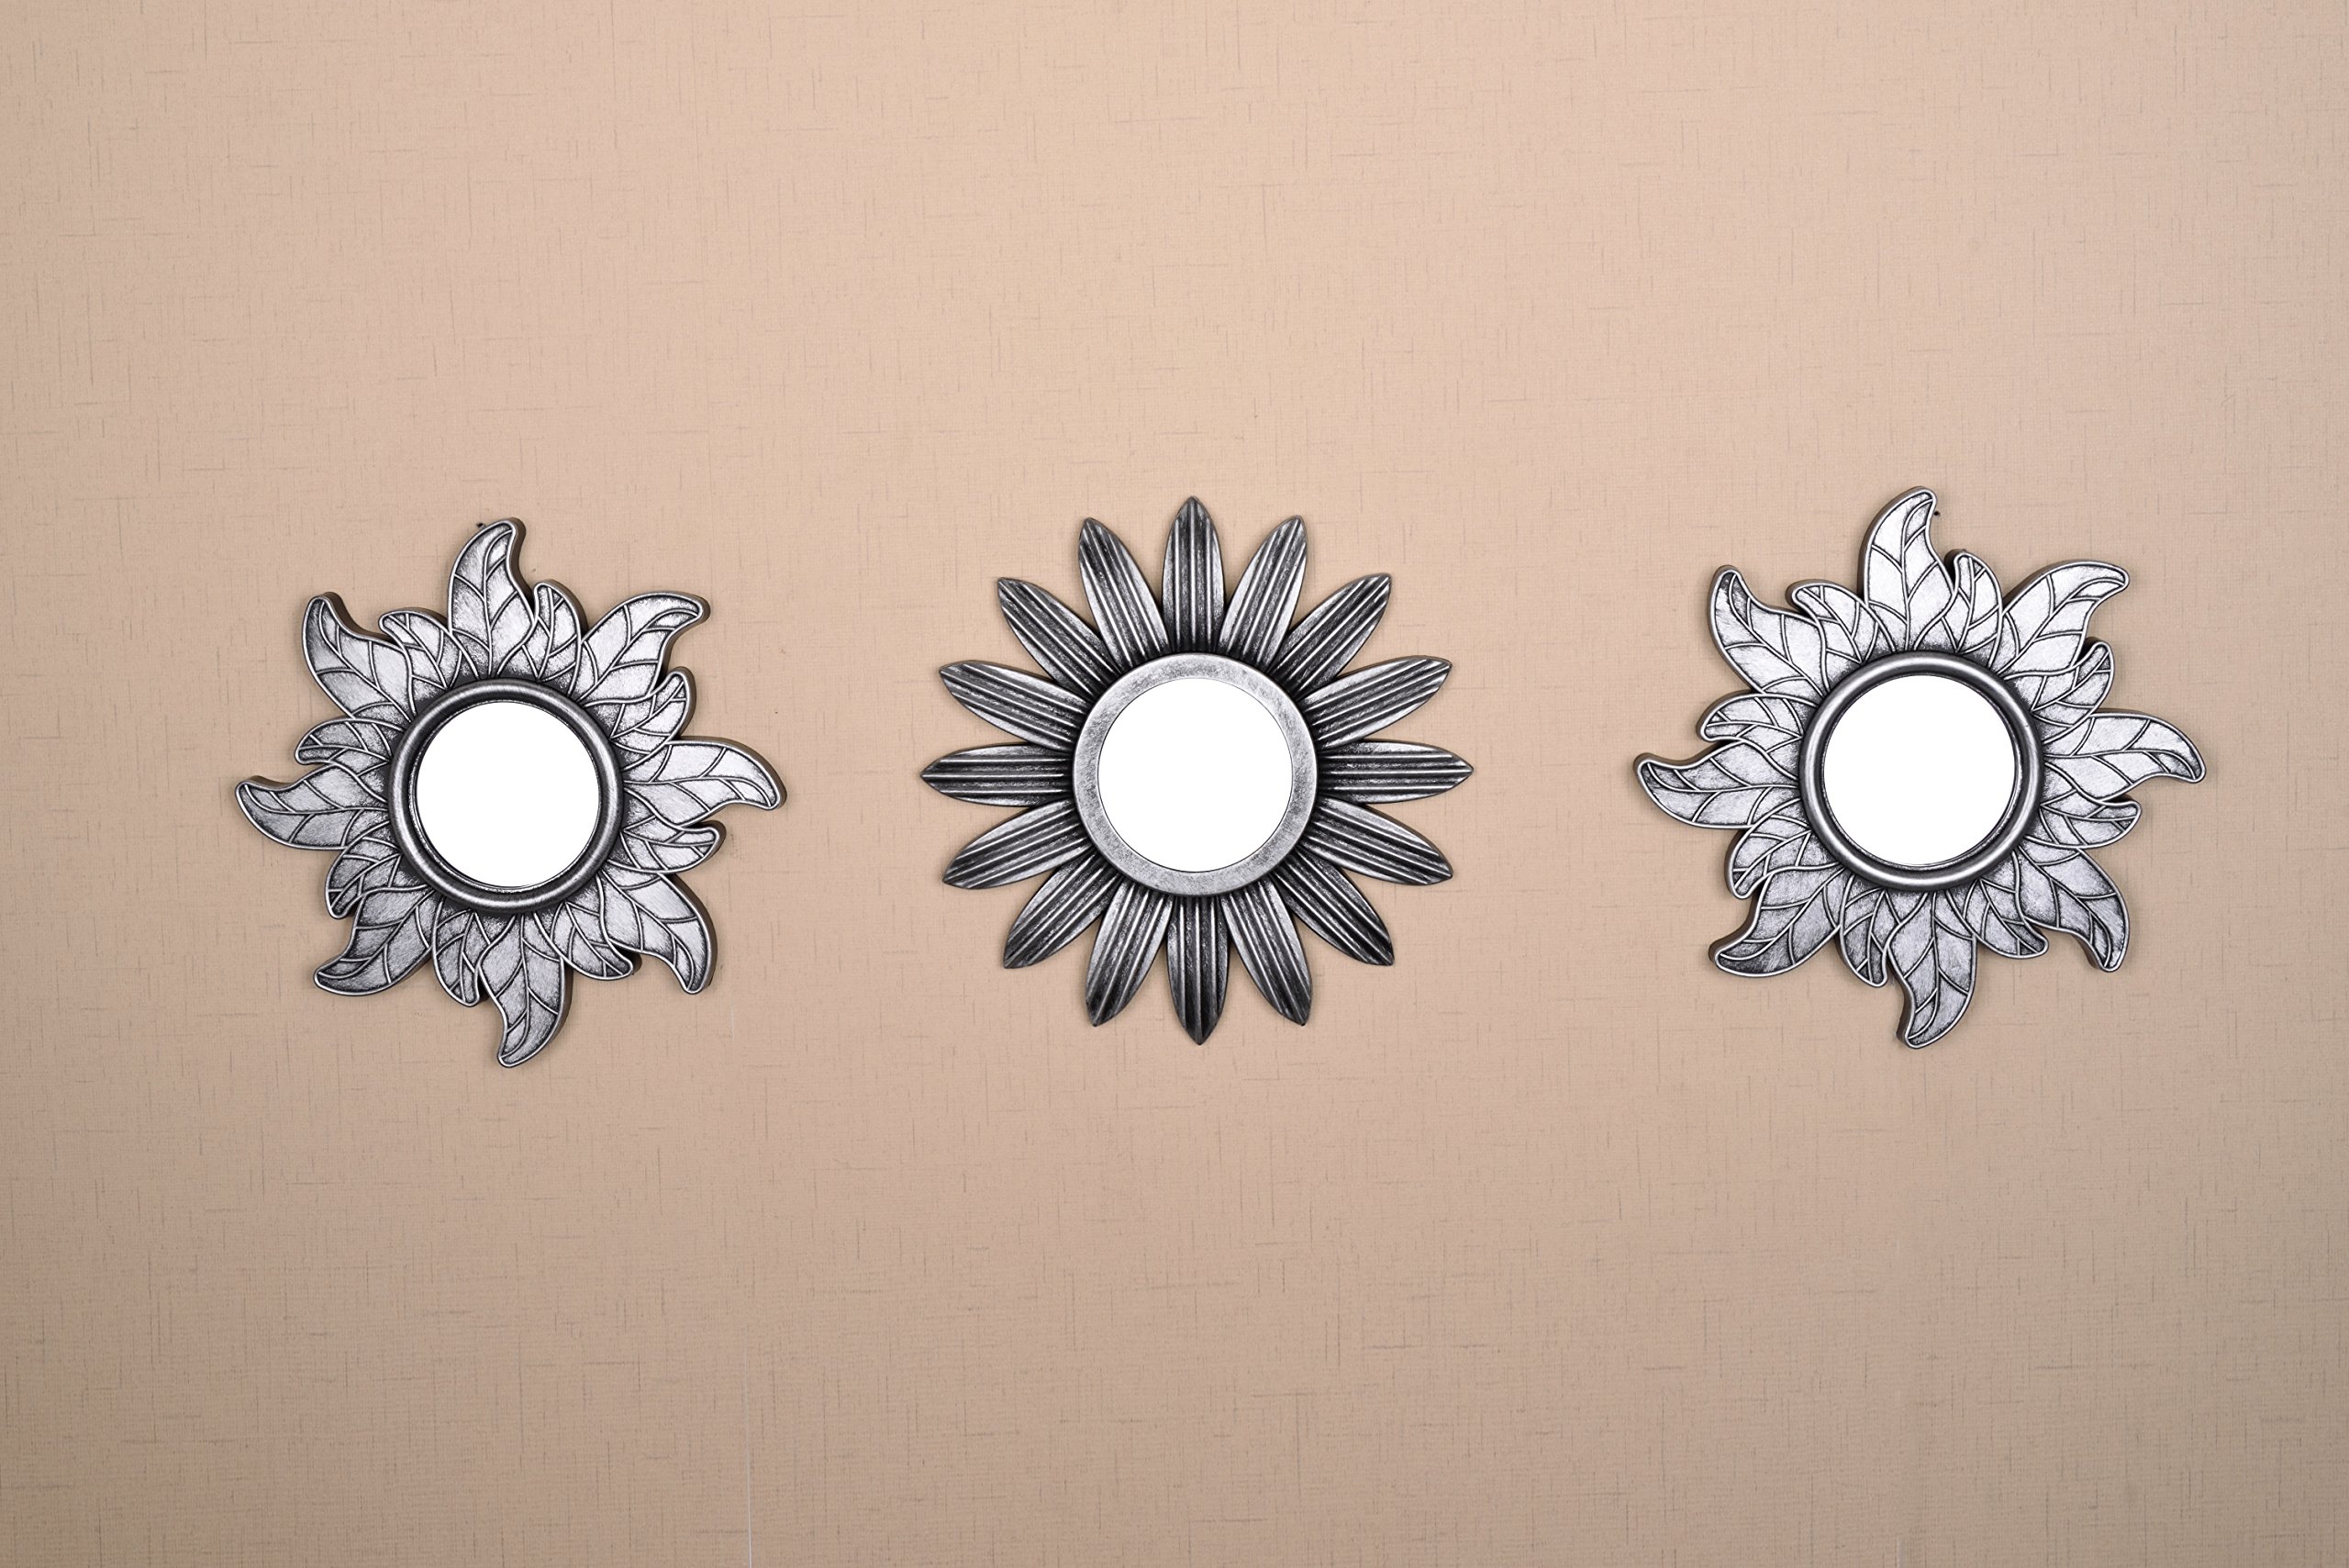 All American Collection New Seperated 3 Piece Decorative Mirror Set, Wall Accent Display (Silver Flower And Sun)